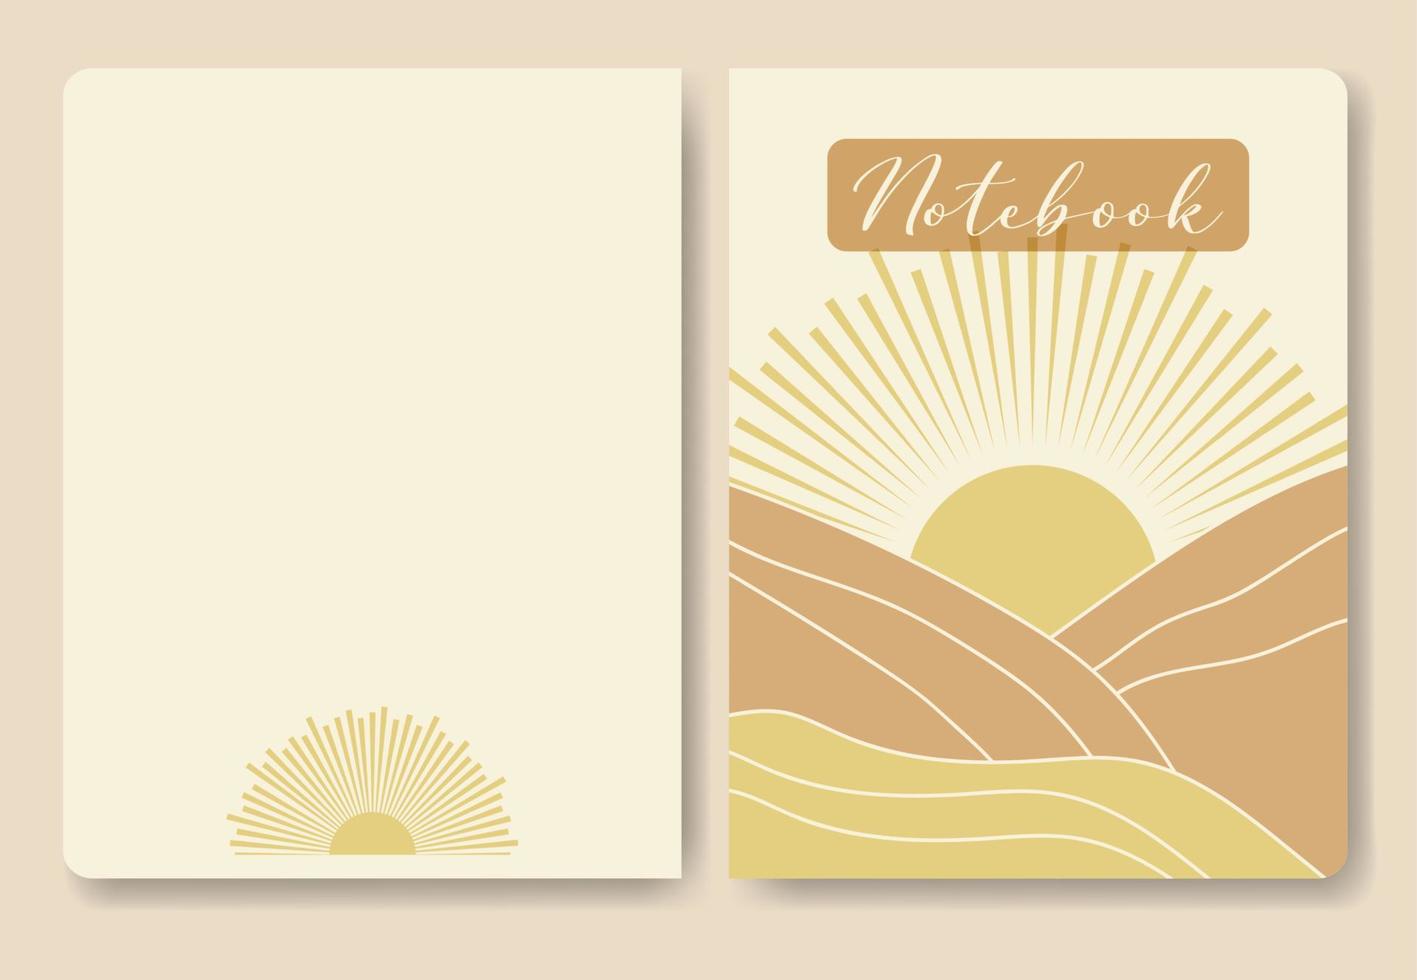 Minimalist sunny valley template for notebook cover. Mountains sunrise, easy to re-size. Vector illustration